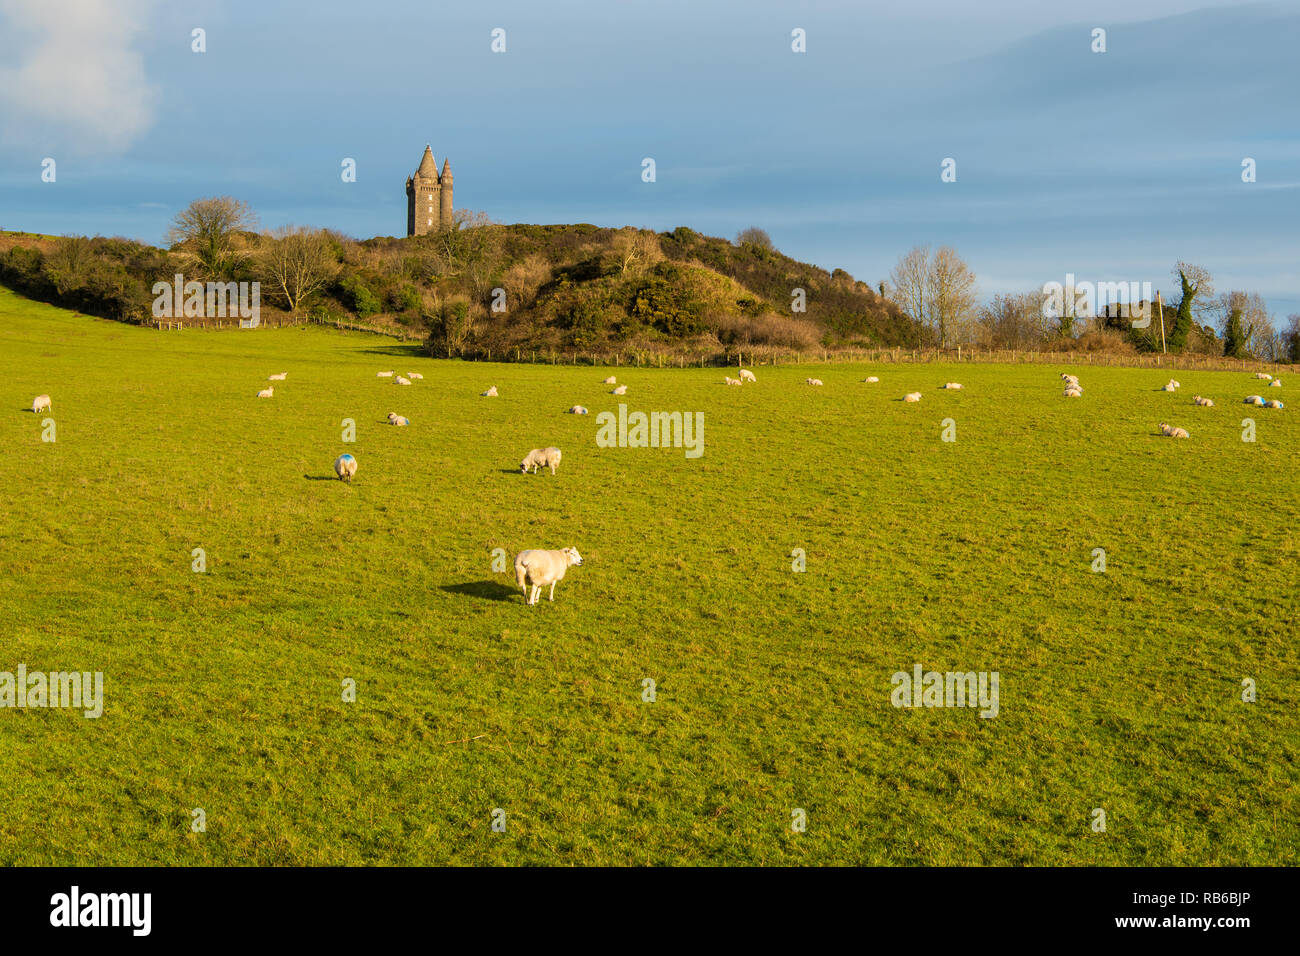 Sheep grazing in a sunny grassy field underneath Scrabo Tower on near Newtonards on the Ards Peninsula, County Down, Northern Ireland Stock Photo